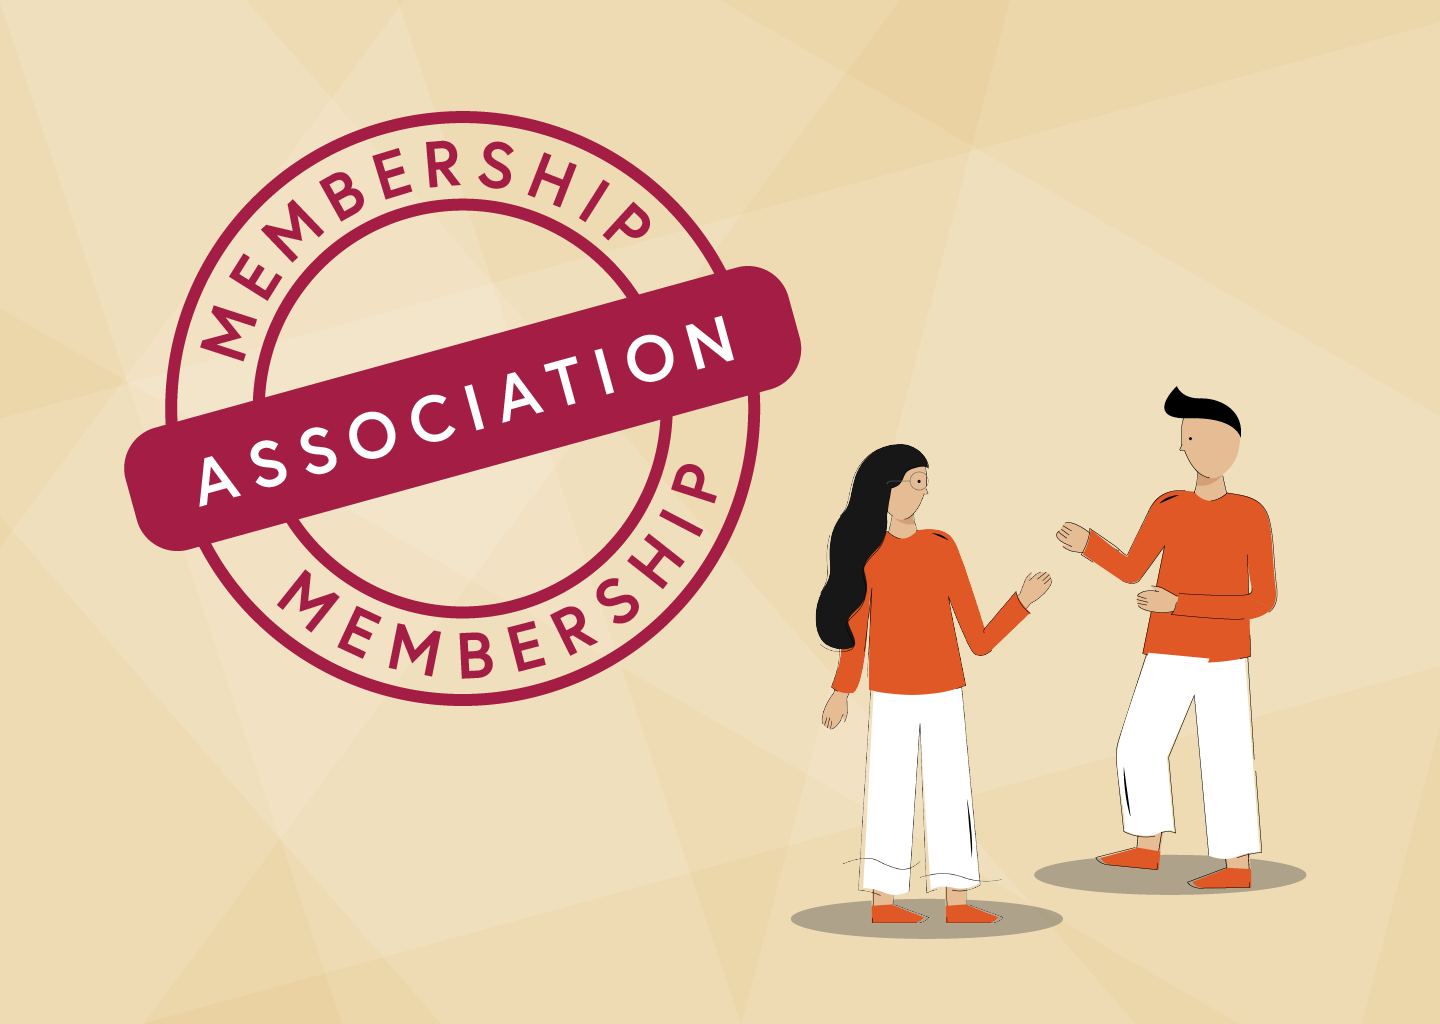 Association Membership: What You Need to Know